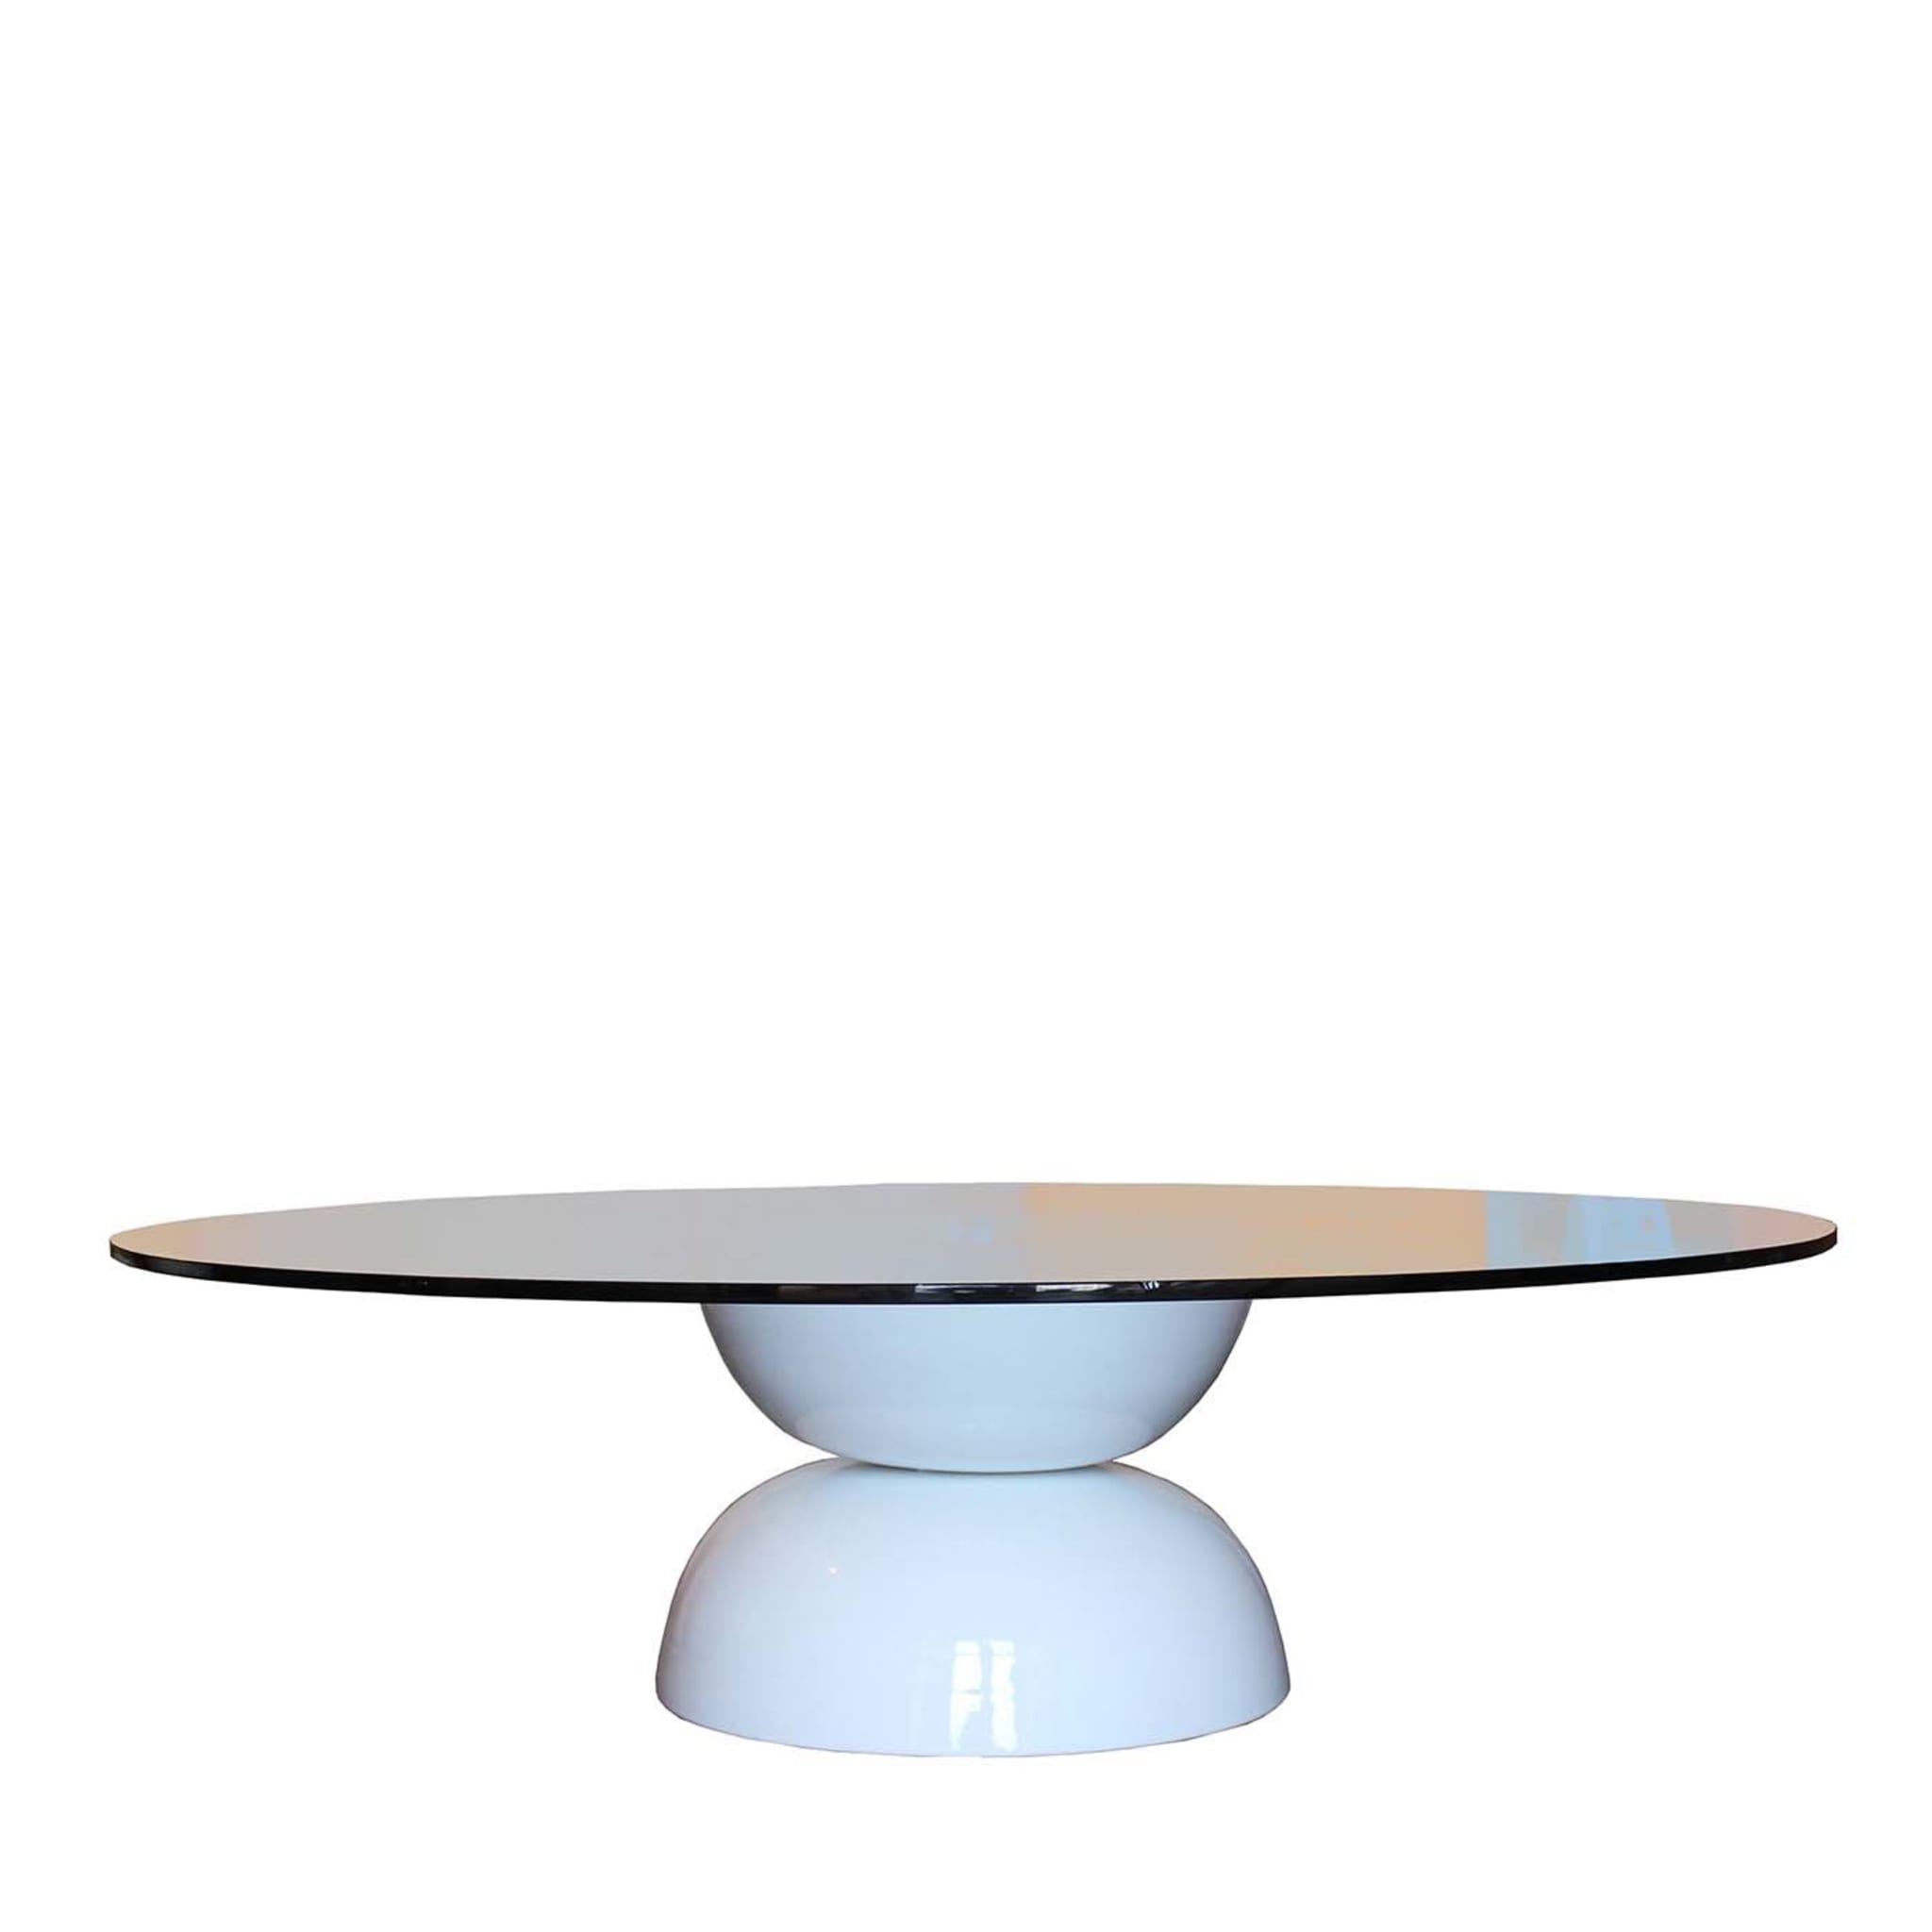 MM4 Small Coffee Table by Mascia Meccani - Main view